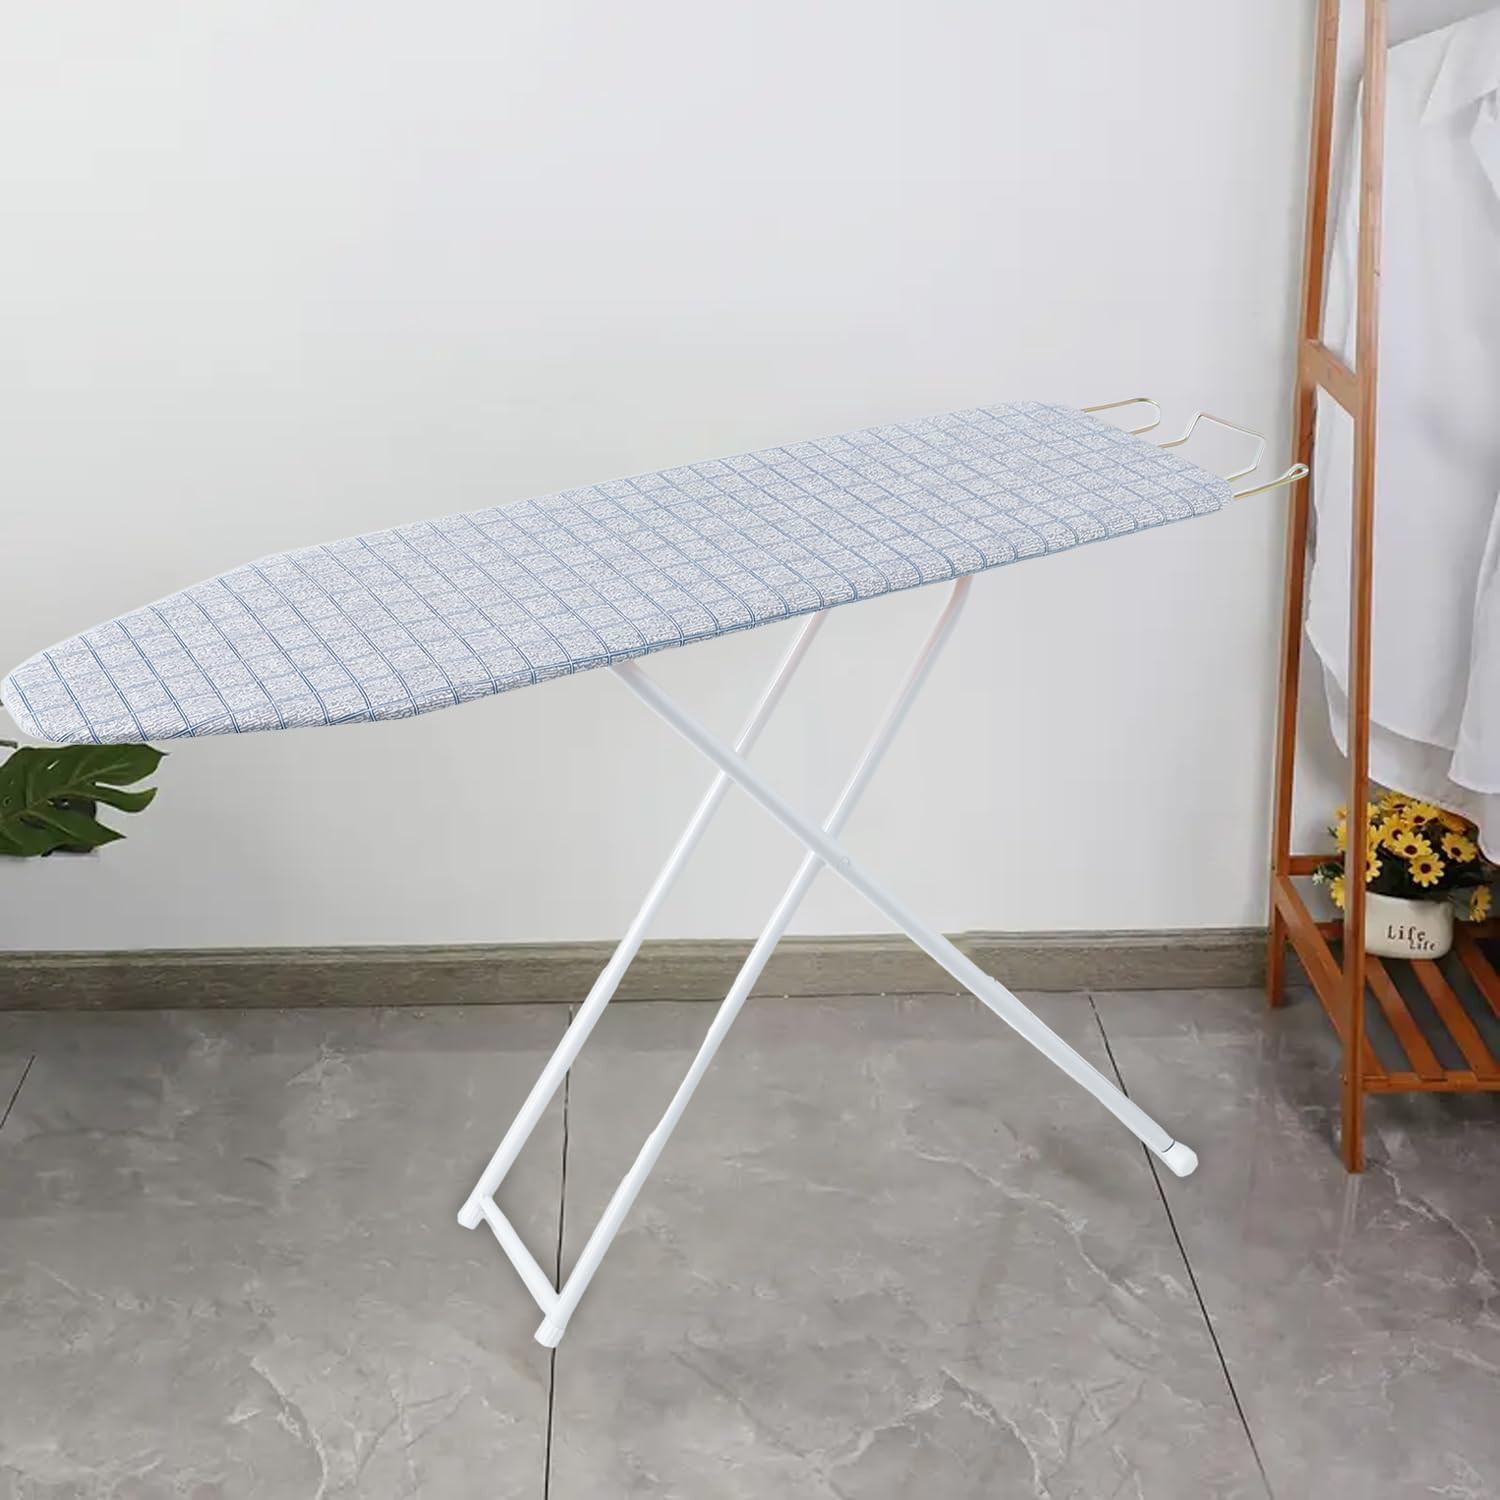 Kuber Industries 42 Inch Ironing Board For Clothes|Adjustable Height Ironing Stand|Press Table for Home (Grey)